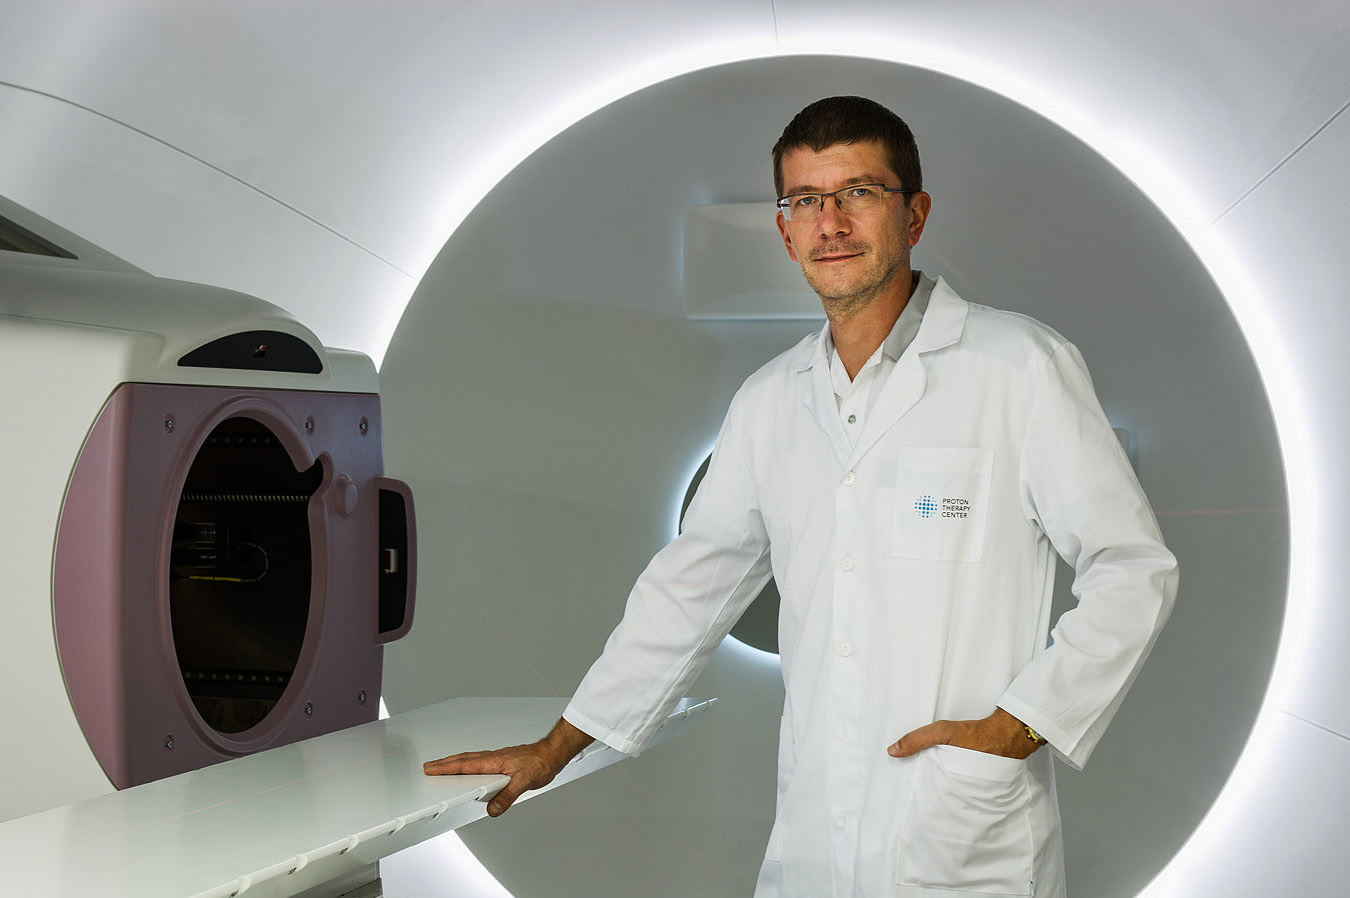 Proton Beam Therapy Centers Switzerland - The Best Picture Of Beam